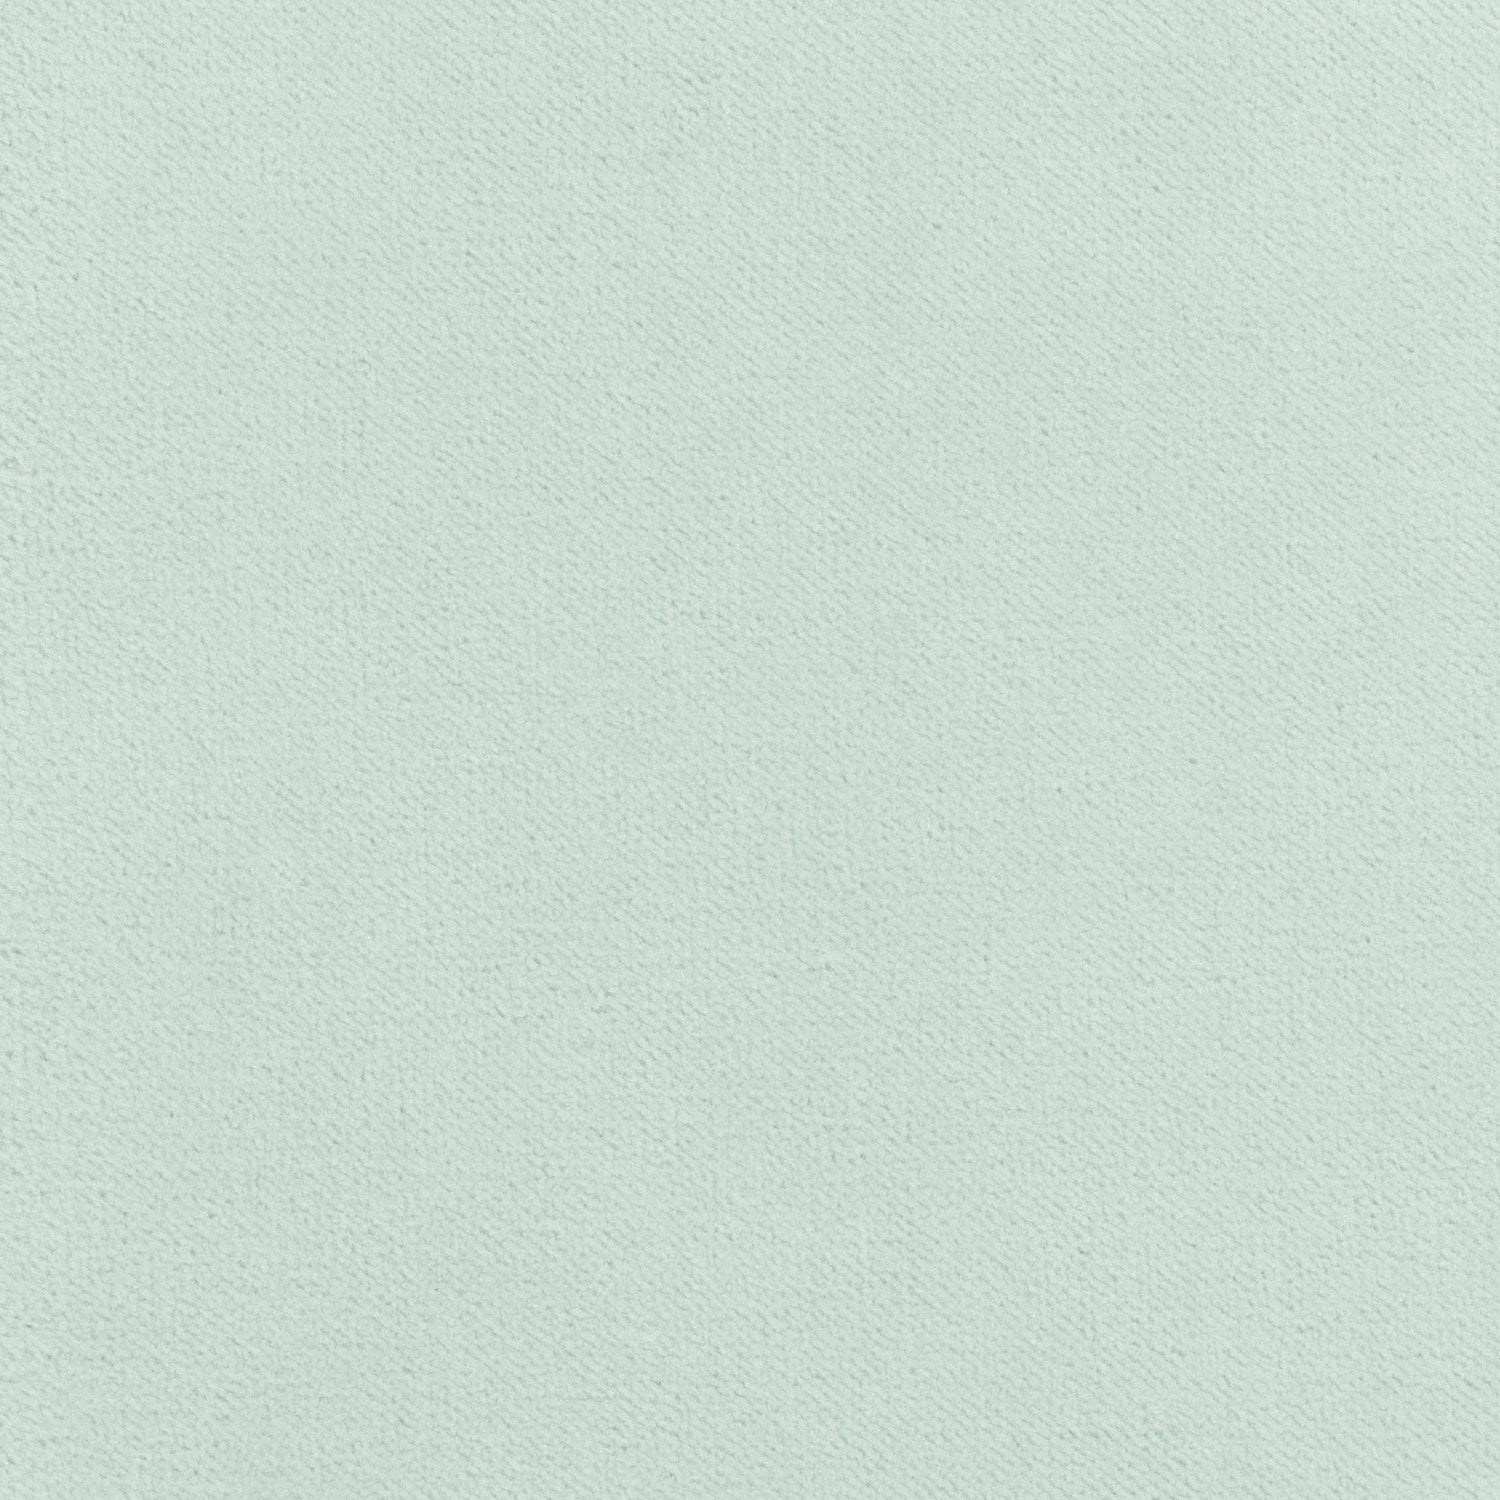 Club Velvet fabric in mist color - pattern number W7248 - by Thibaut in the Club Velvet collection